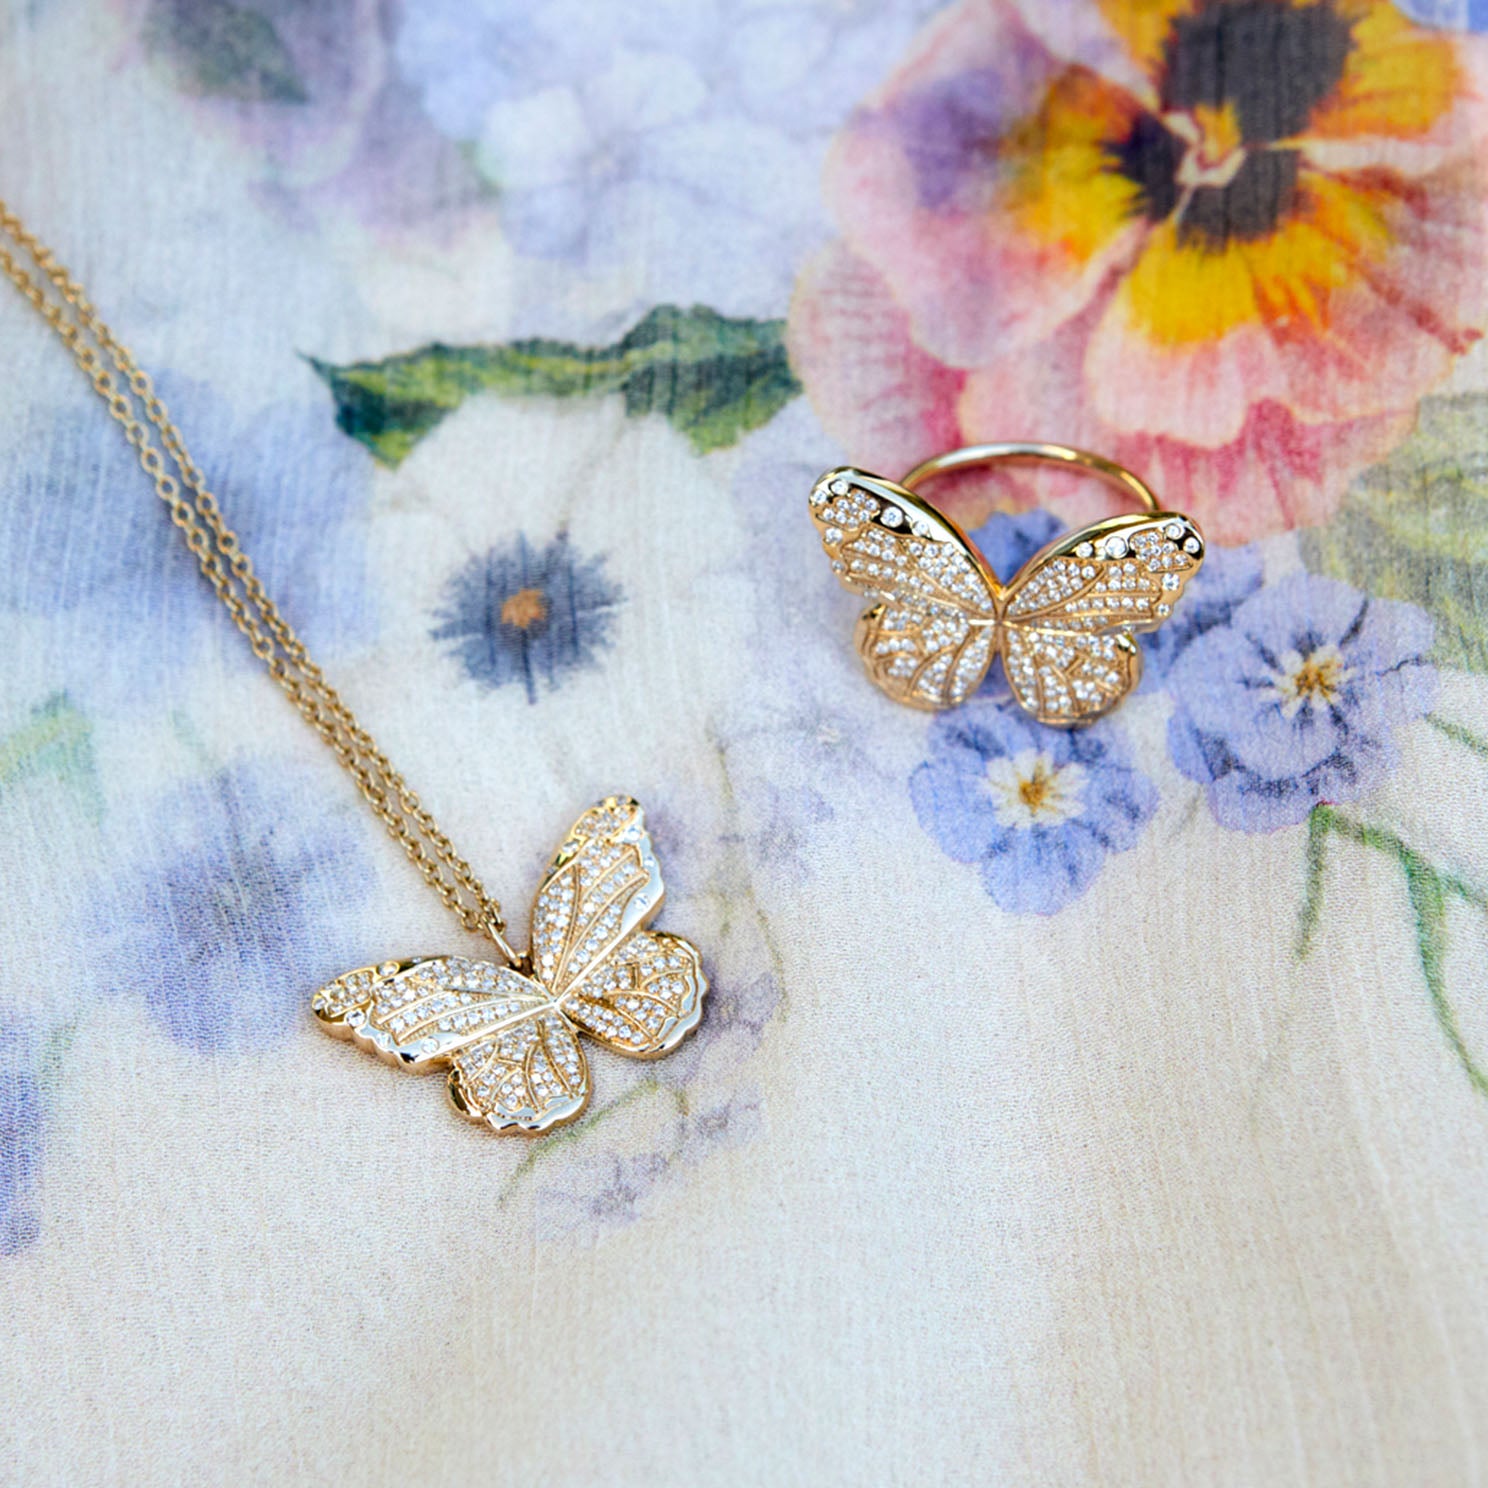 Pavé Diamond Jumbo Butterfly Ring in 14k yellow gold next to jumbo butterfly necklace